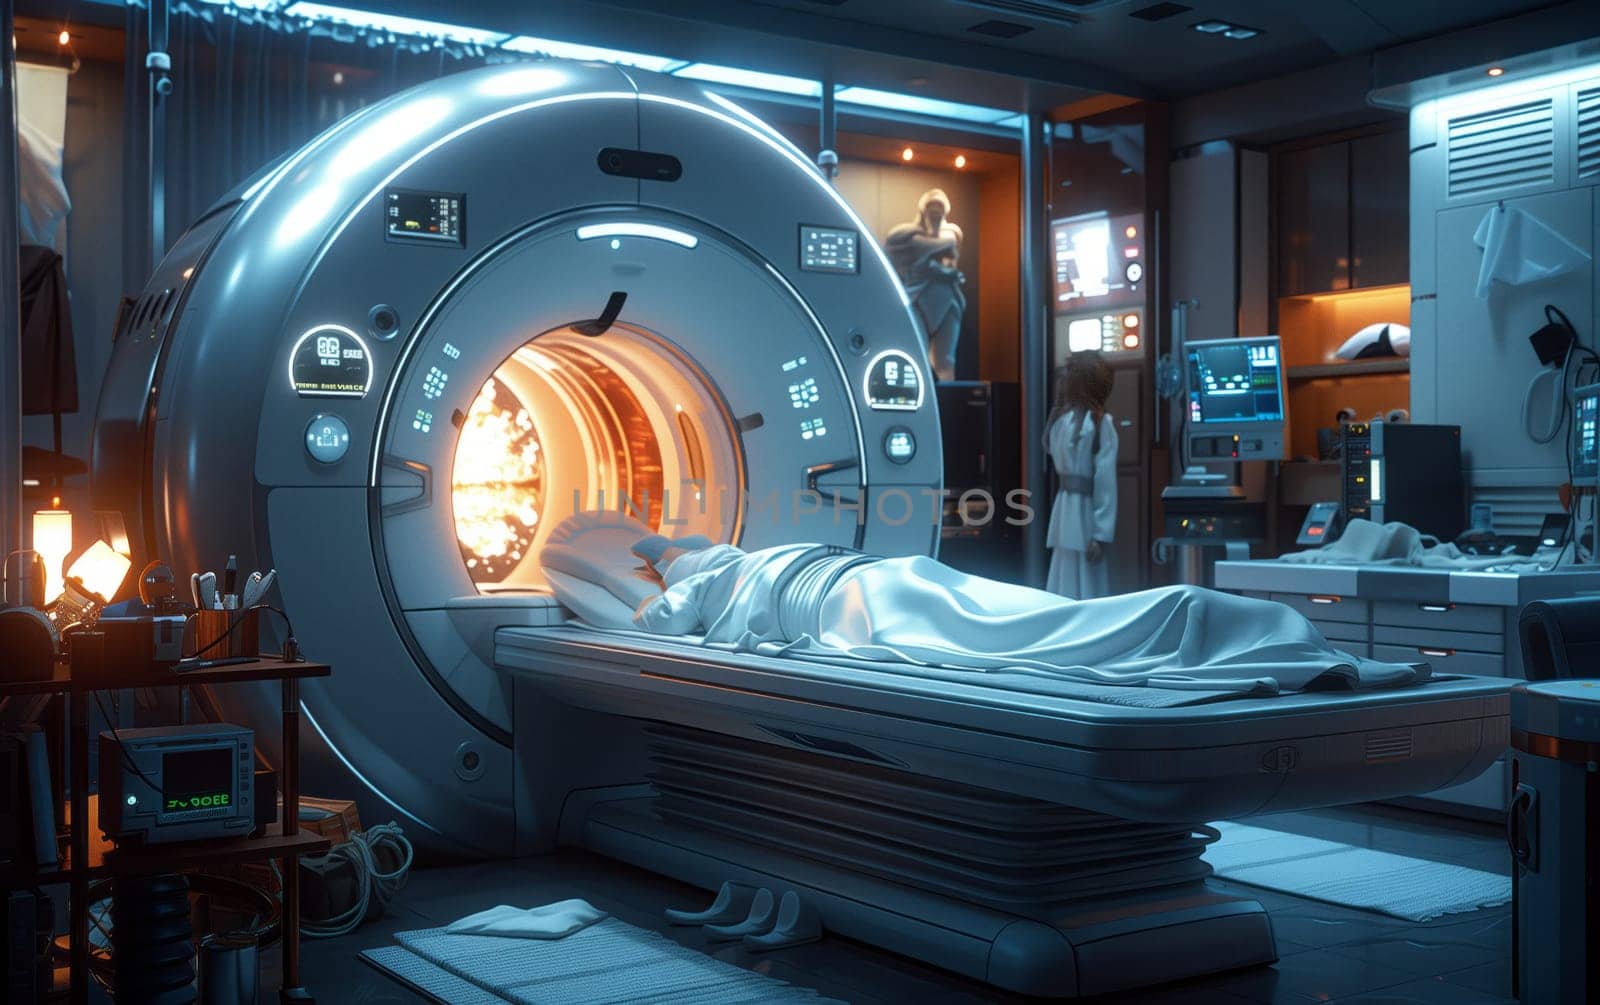 The individual is positioned inside a circular machine resembling a large automotive tire. The machine emits an electric blue light, surrounded by metal walls in a hospital room